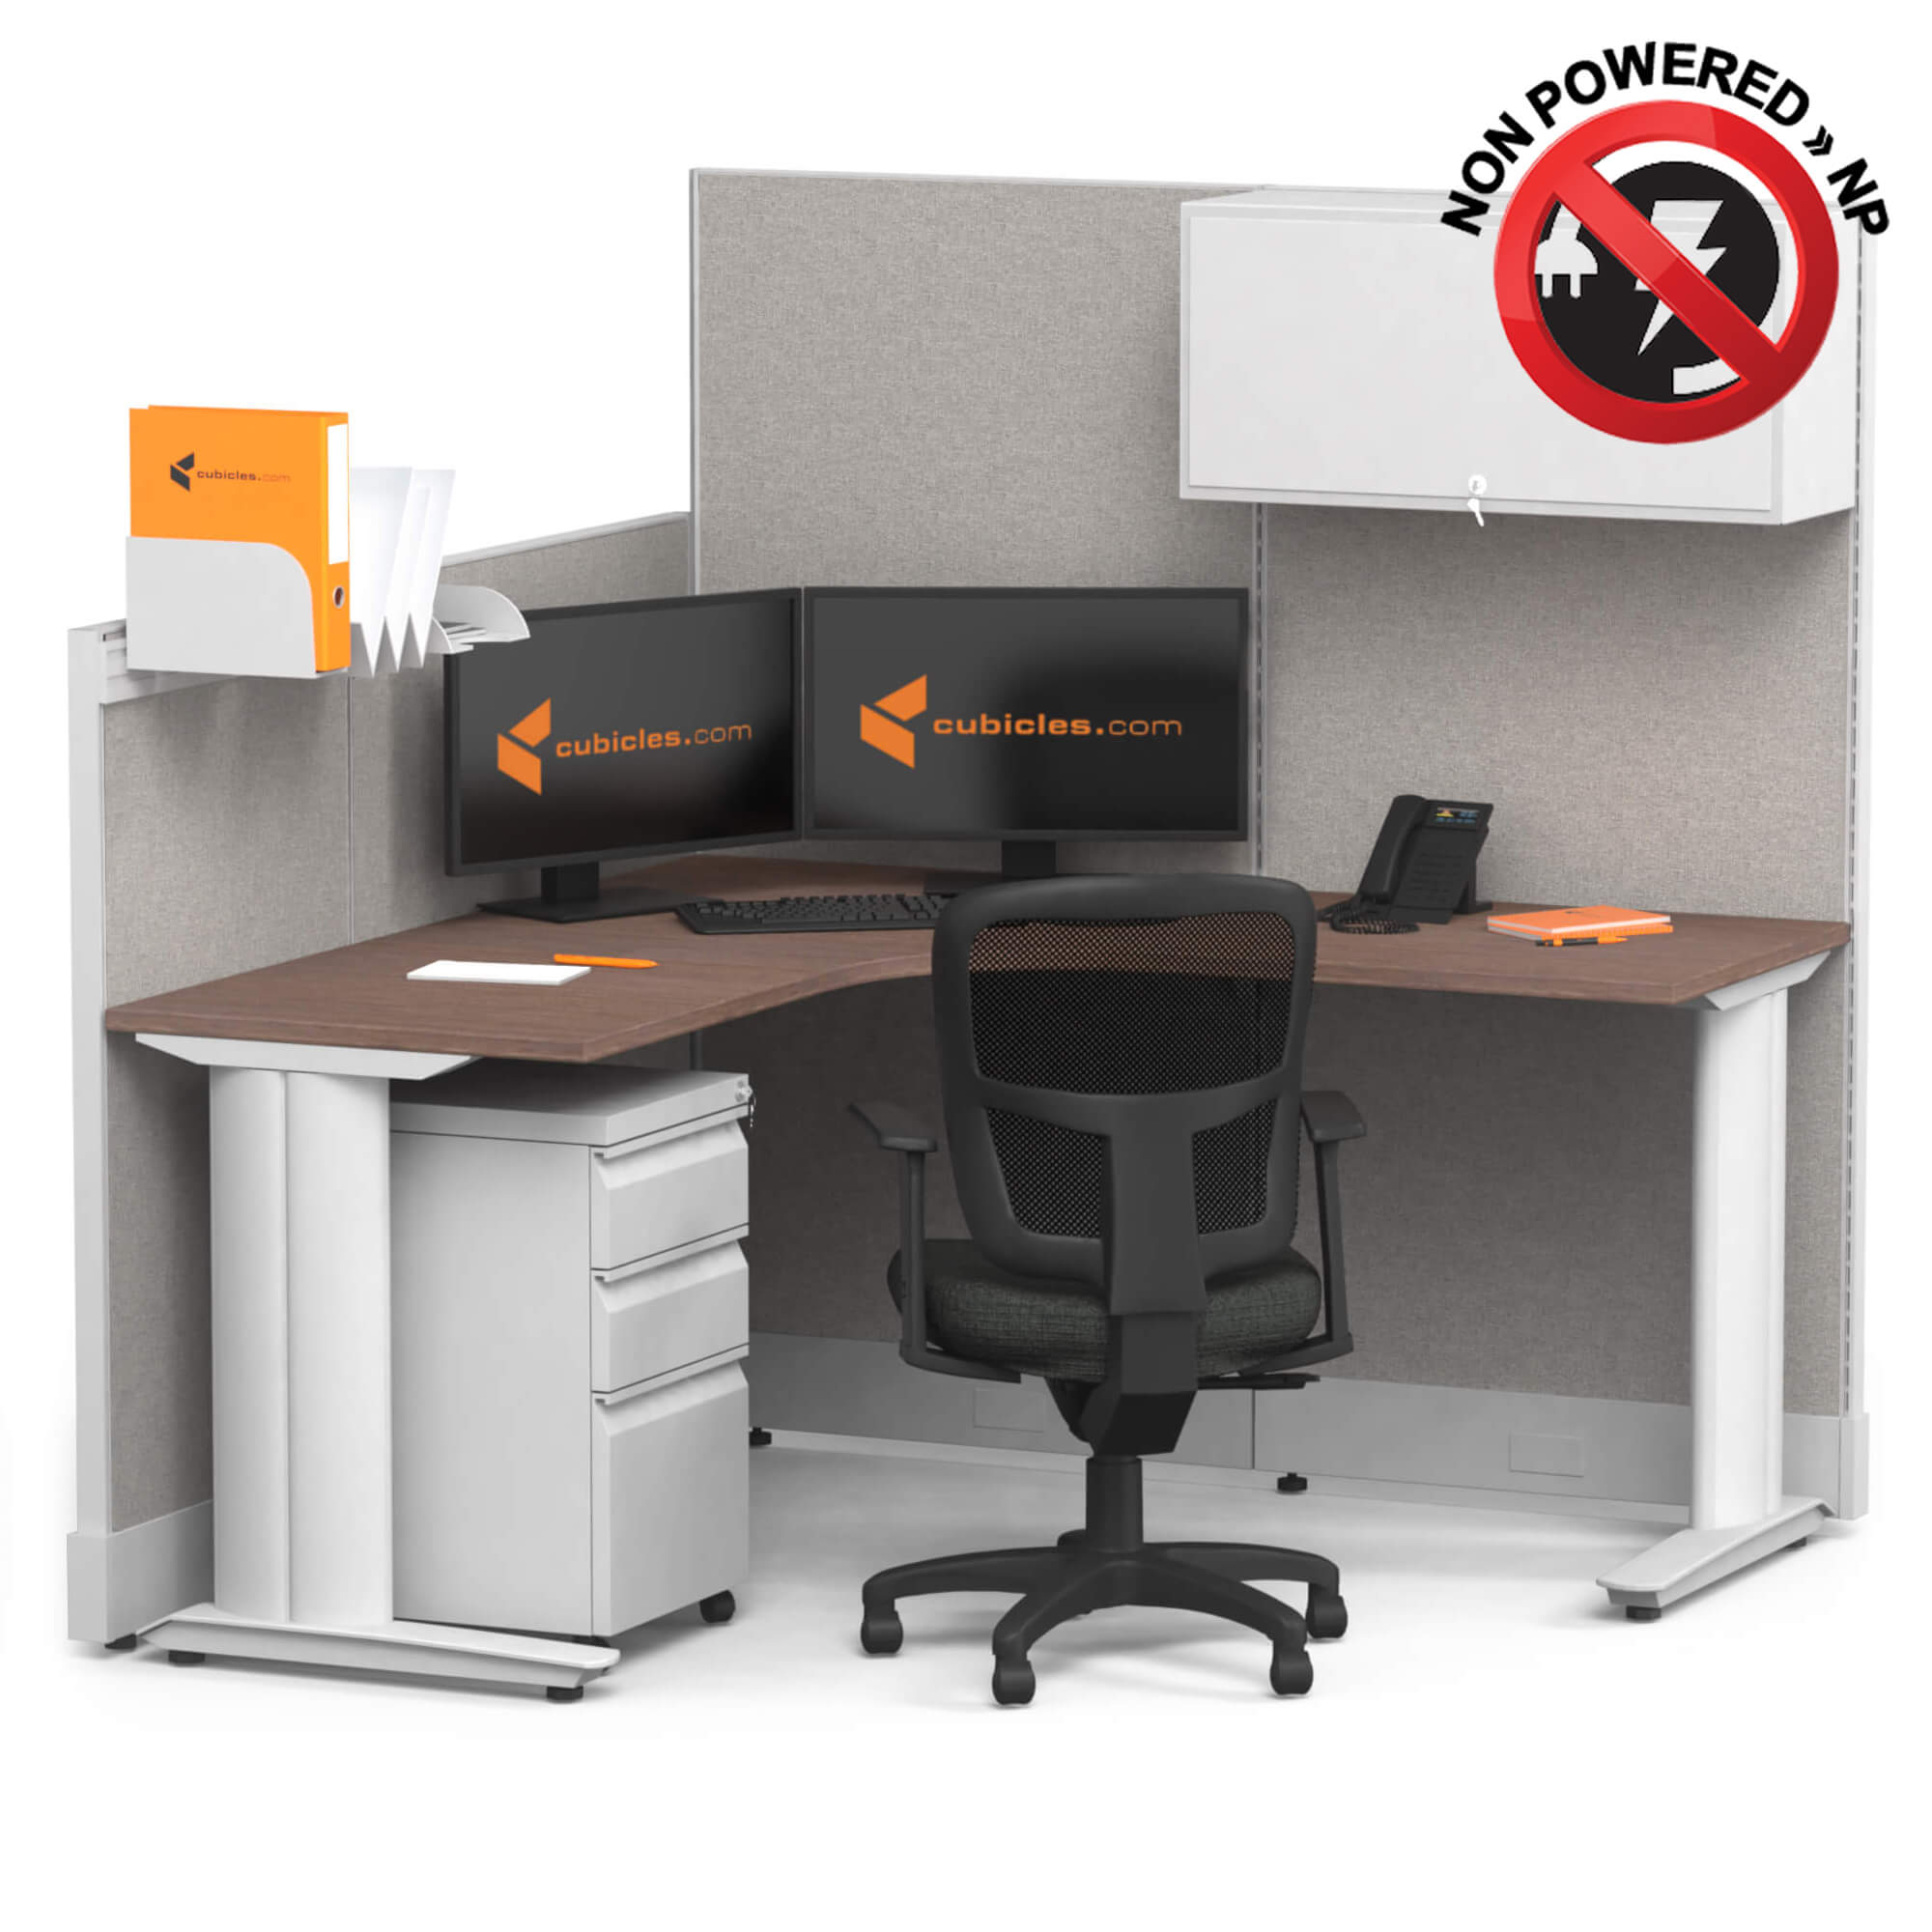 cubicle-desk-l-shaped-with-storage-1pack-non-powered.jpg